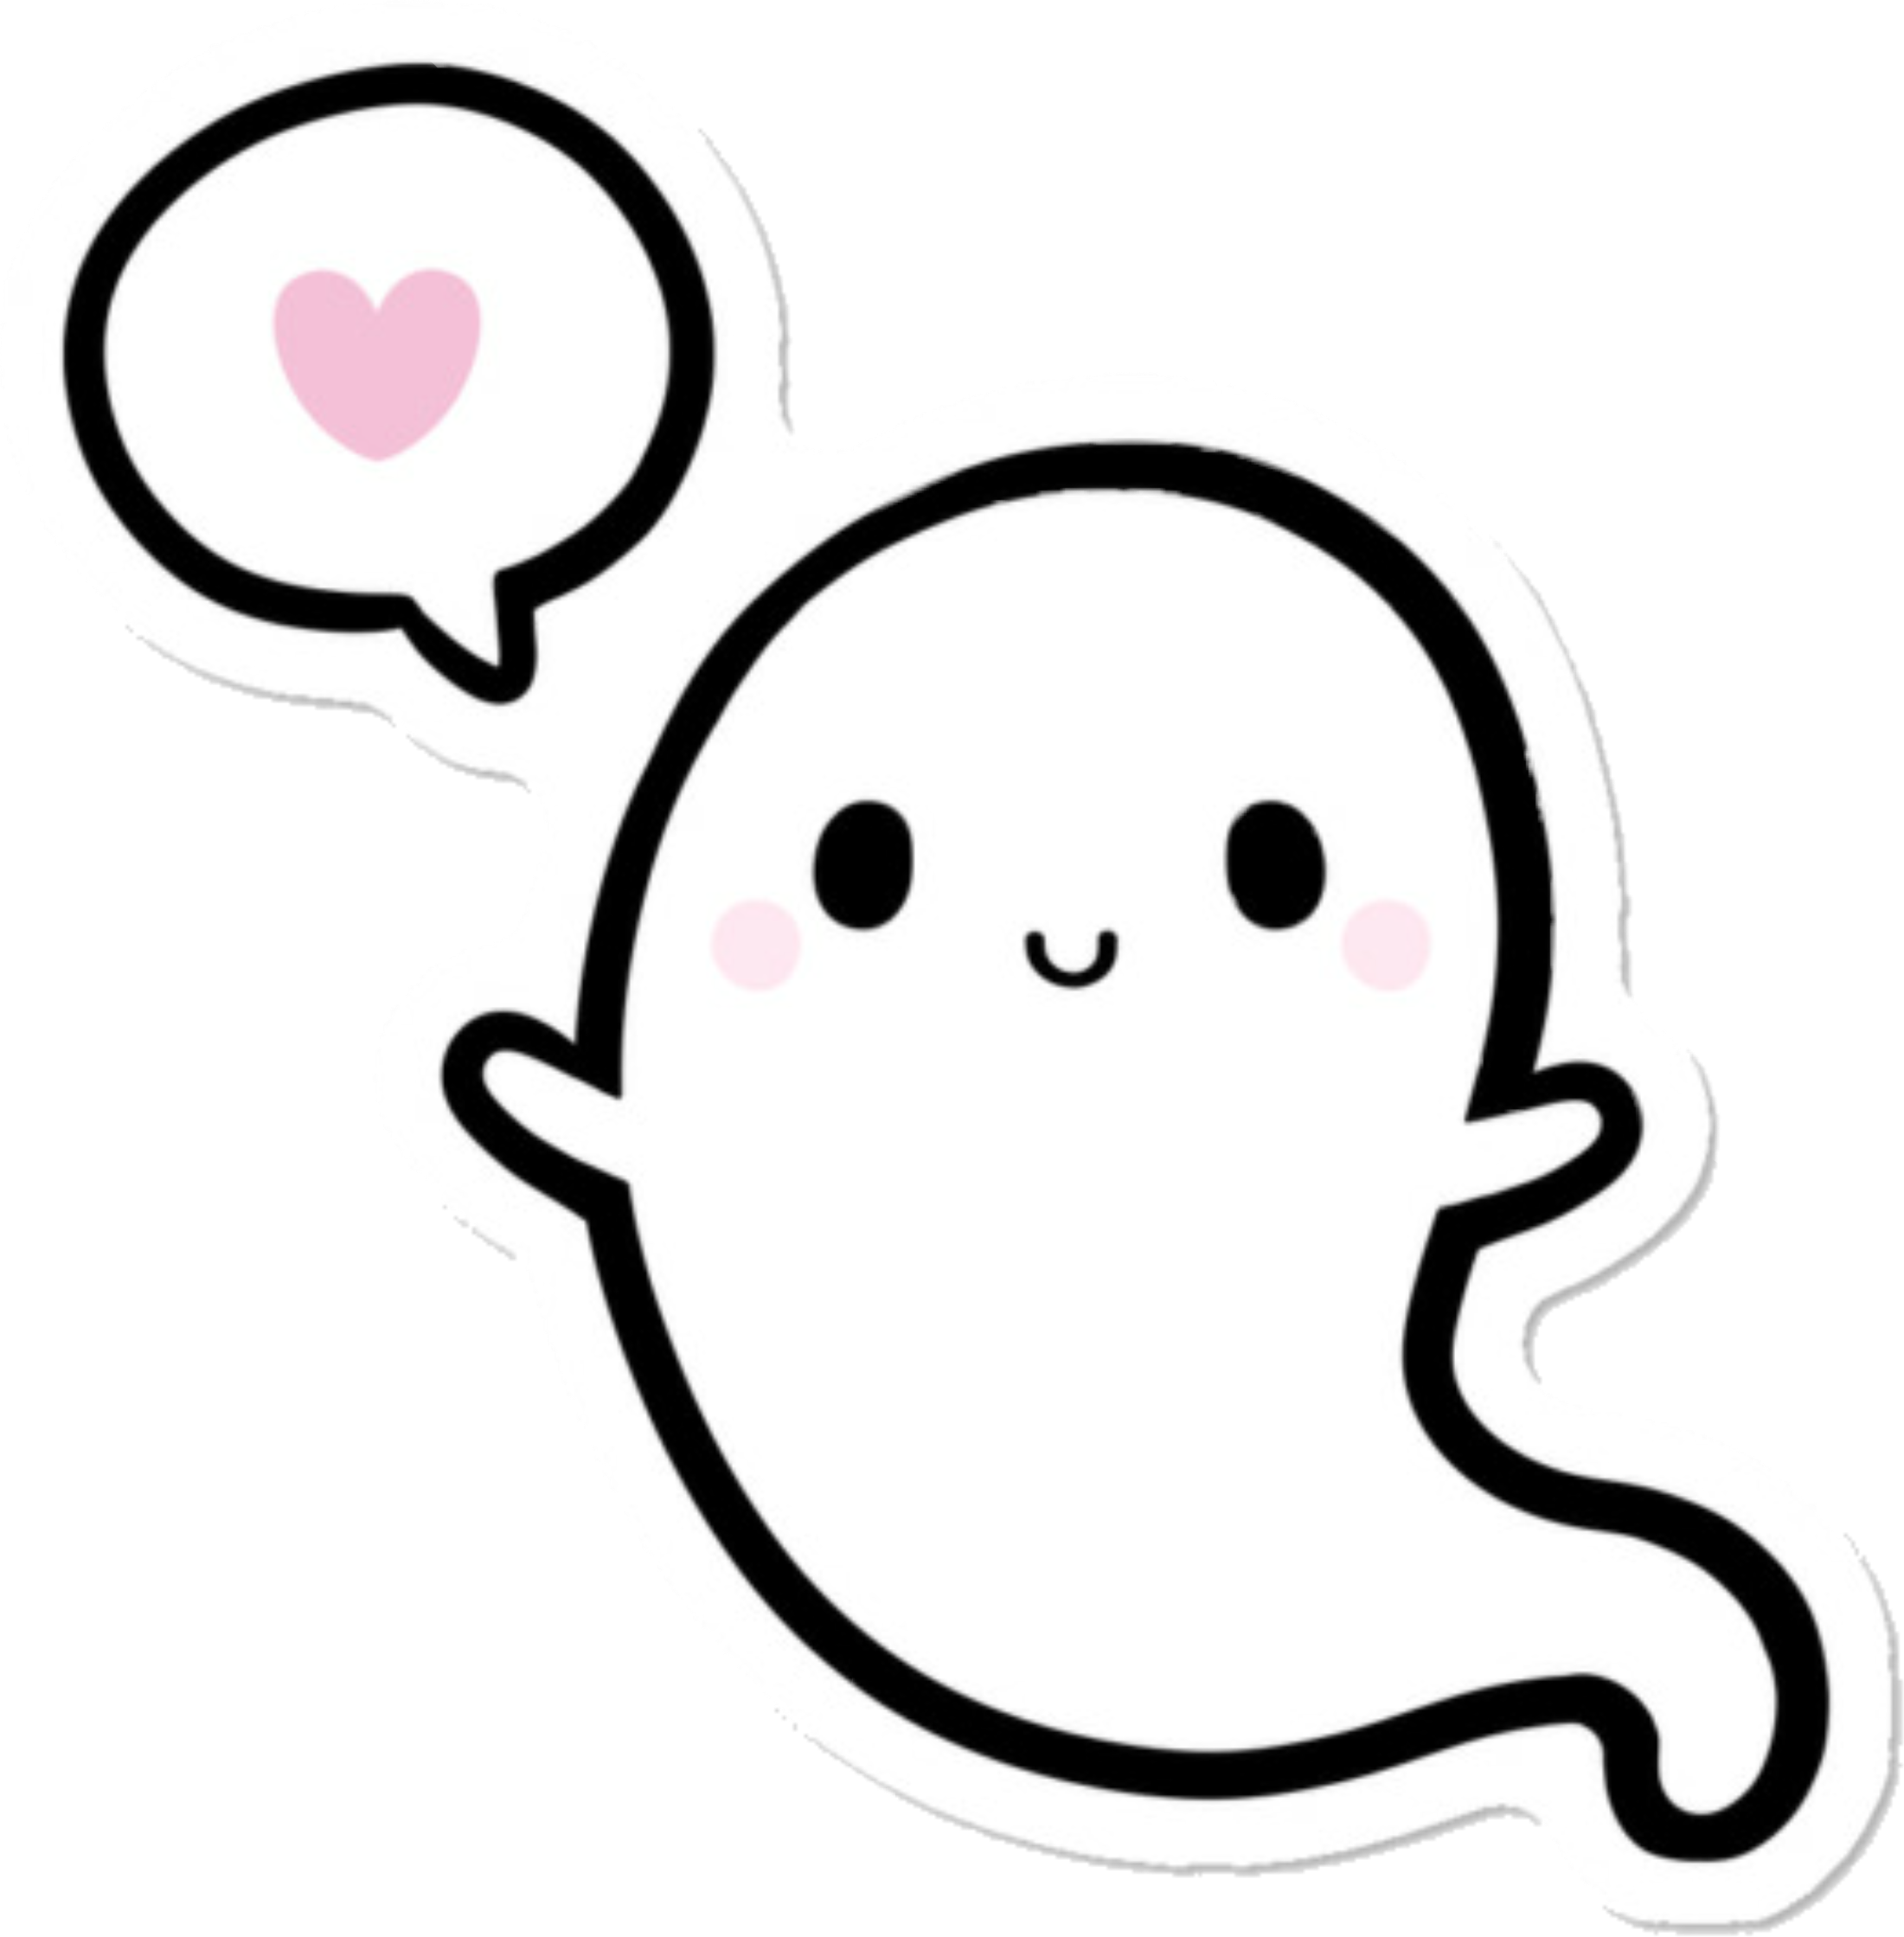 Cute Ghost With Heart Bubble Sticker